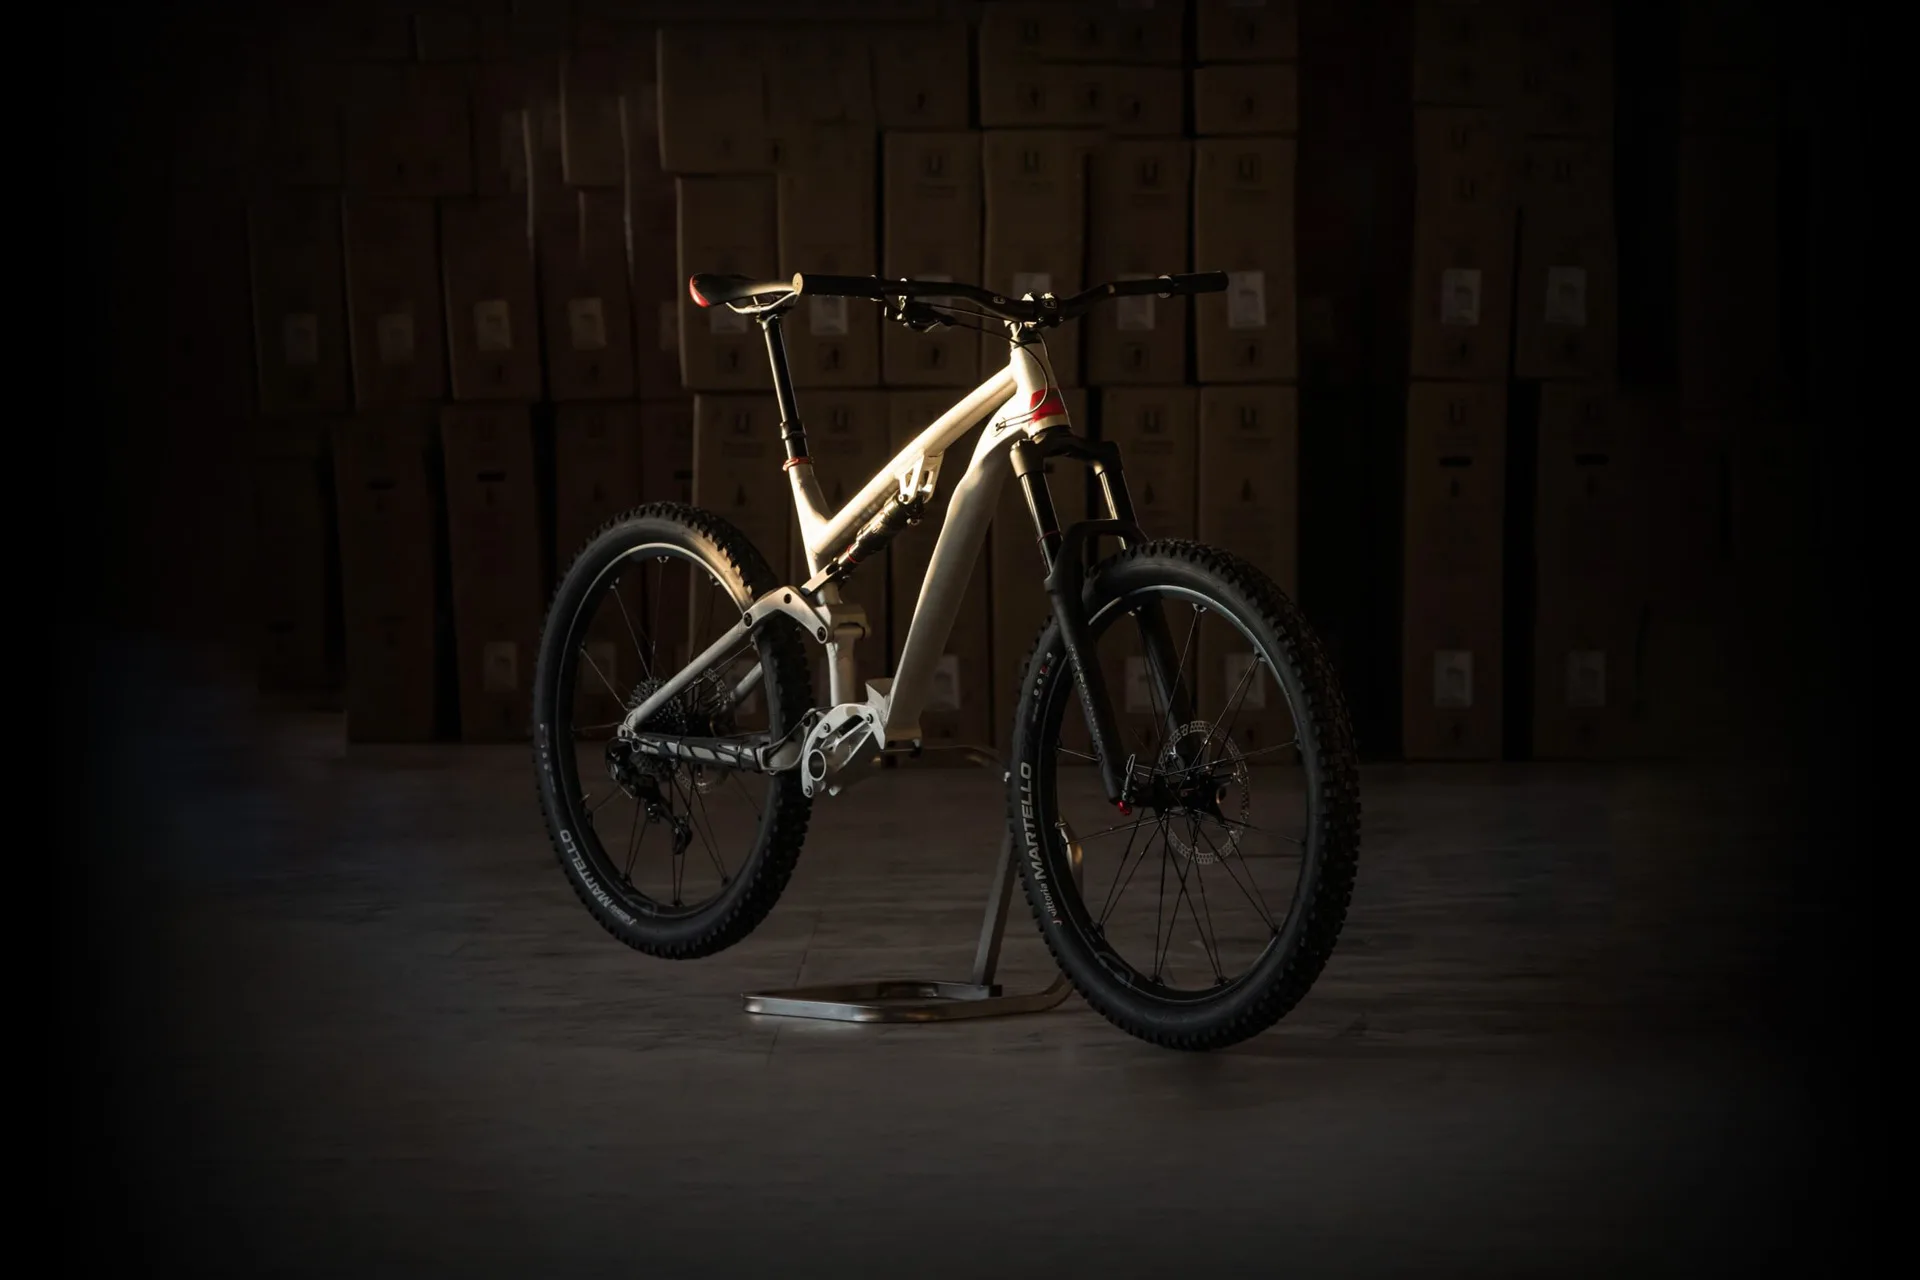 Thok news - WHAT LIES BEHIND THE CREATION OF A WINNING E-MTB: “I AM GOING TO REVEAL THE SECRETS OF THE ITALIAN BRAND THOK”